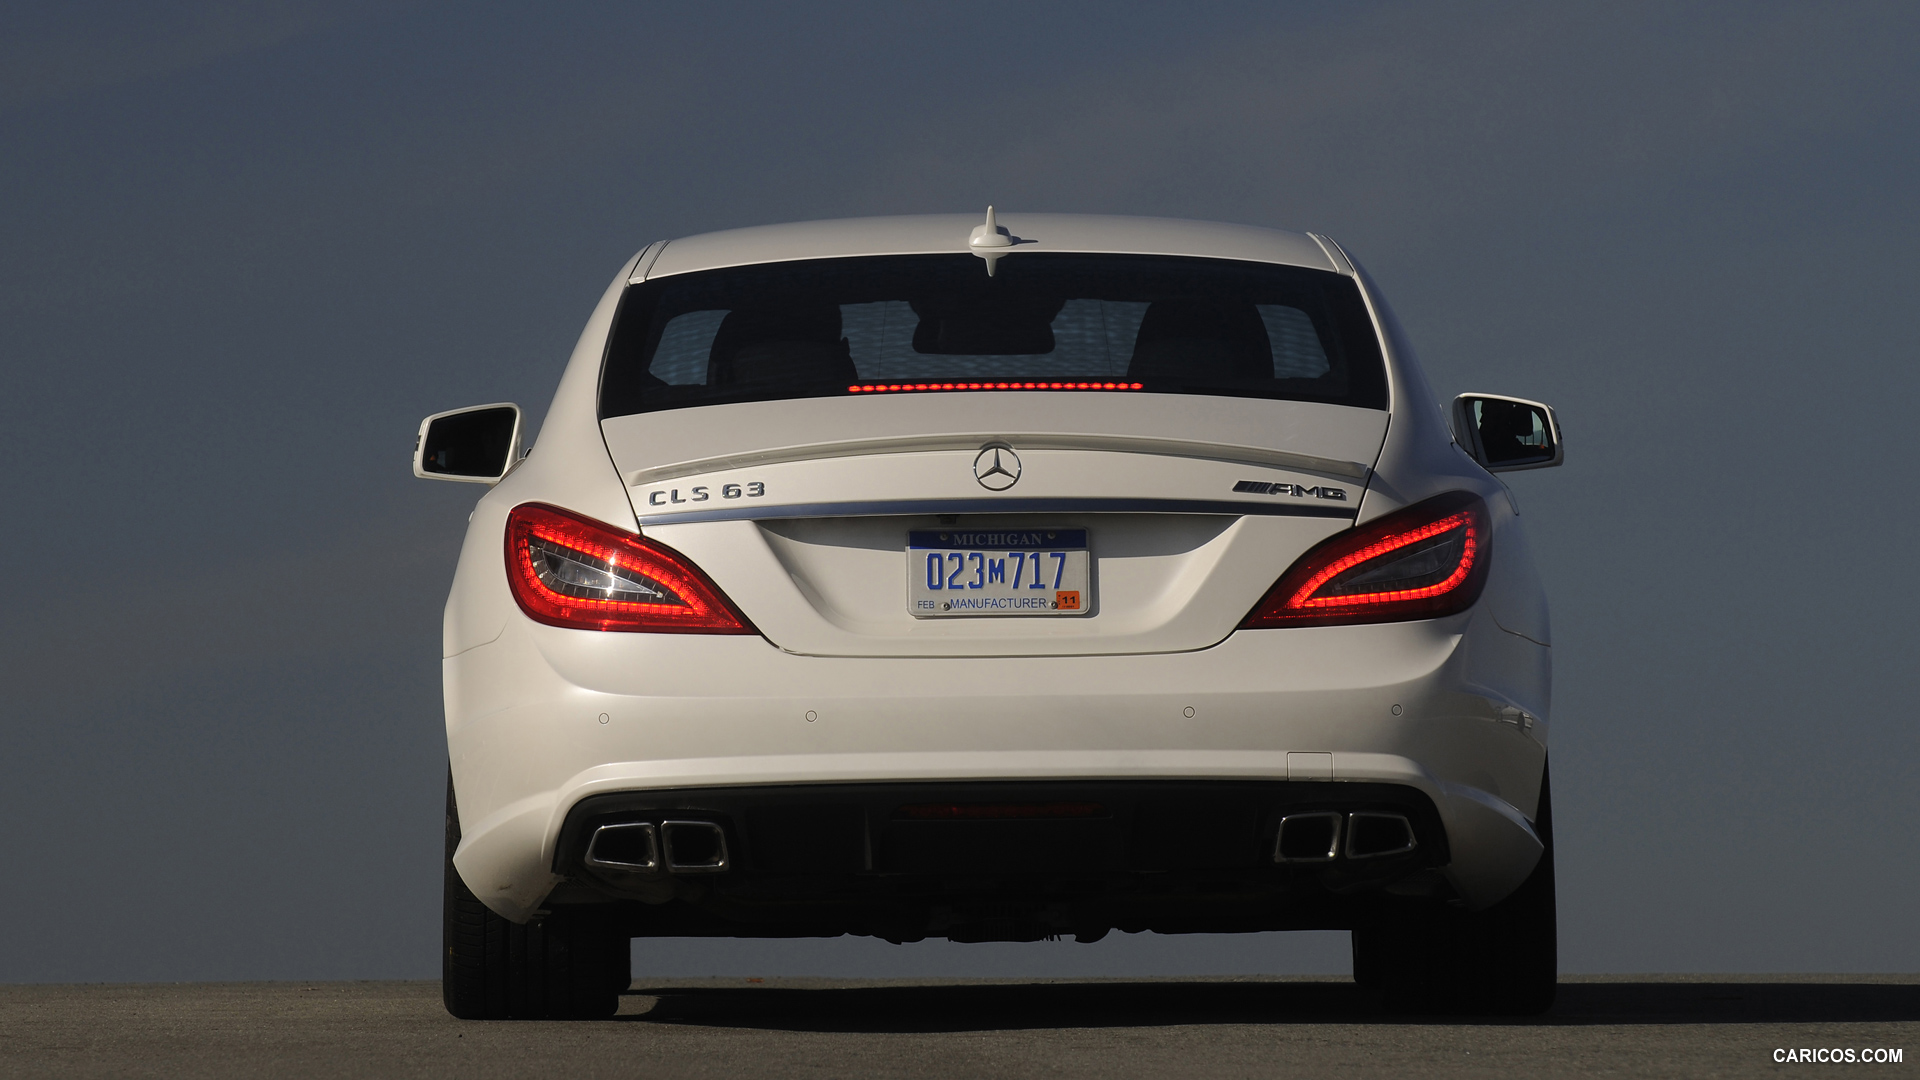 Mercedes-Benz CLS63 AMG (2012) US-Version - Diamond White - Rear , #25 of 100